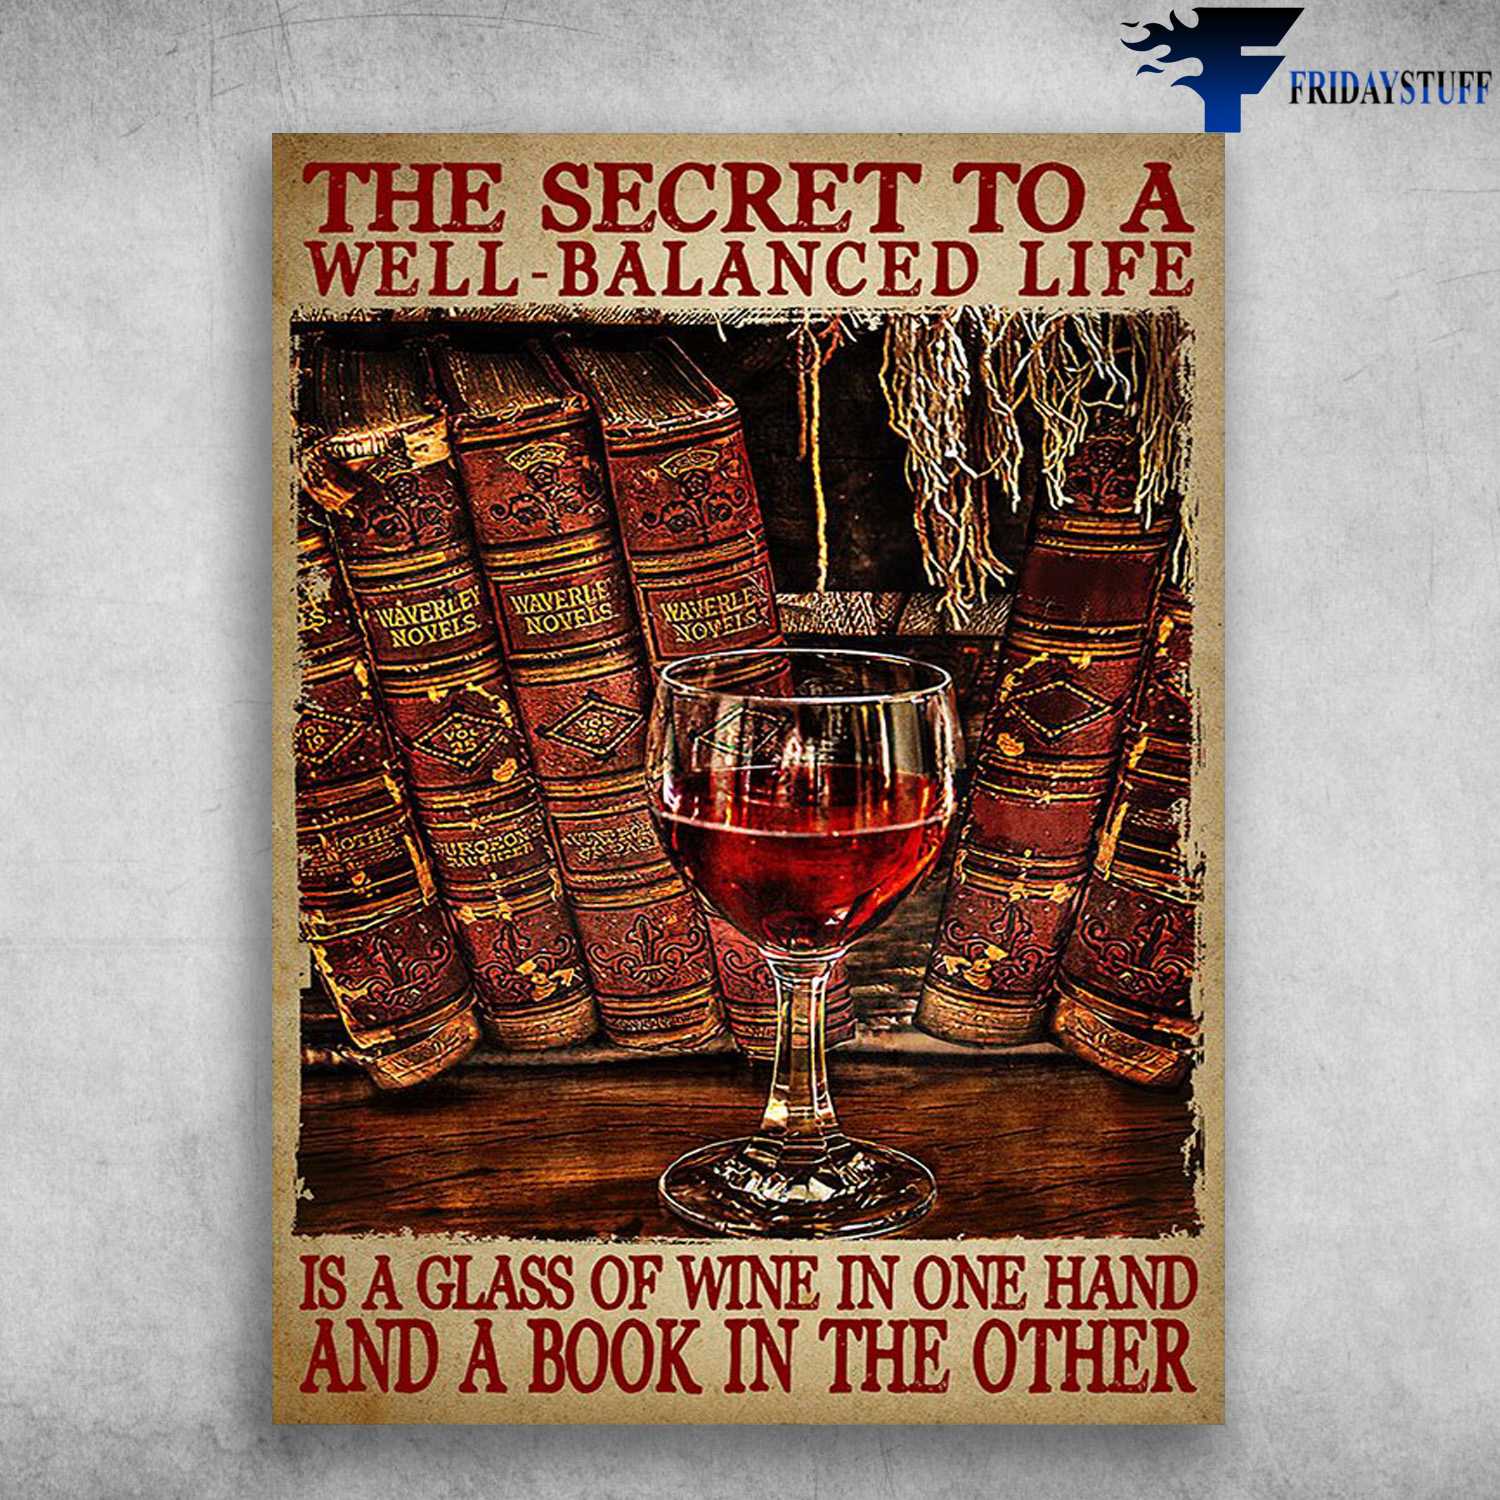 Book And Wine - The Secret To A Well-Balanced Life, Is A Glass Of Wine In One Hand, And A Book In The Other